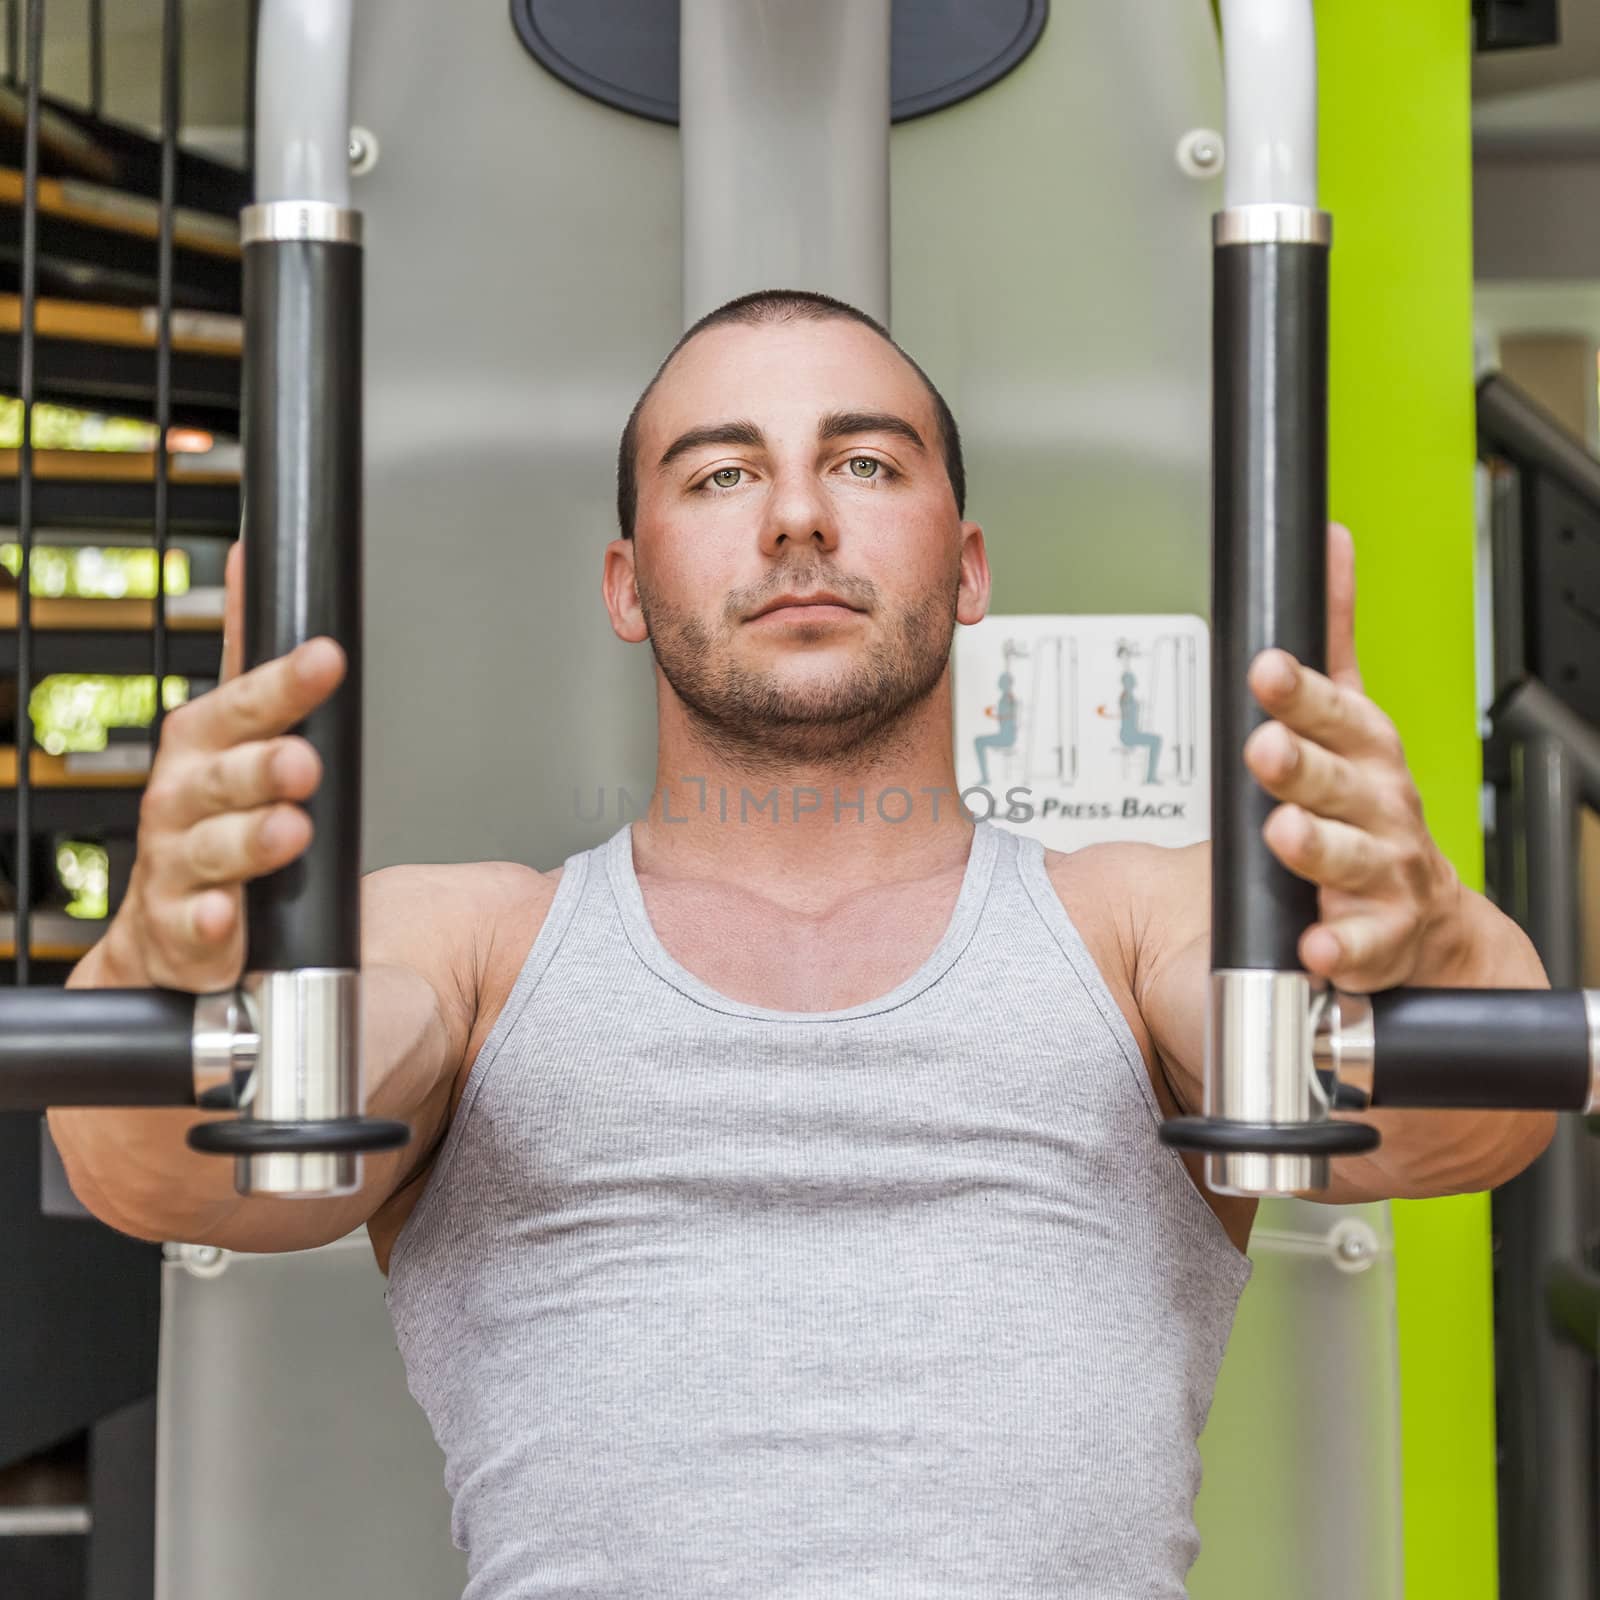 An image of a muscular male on a butterfly machine in gym